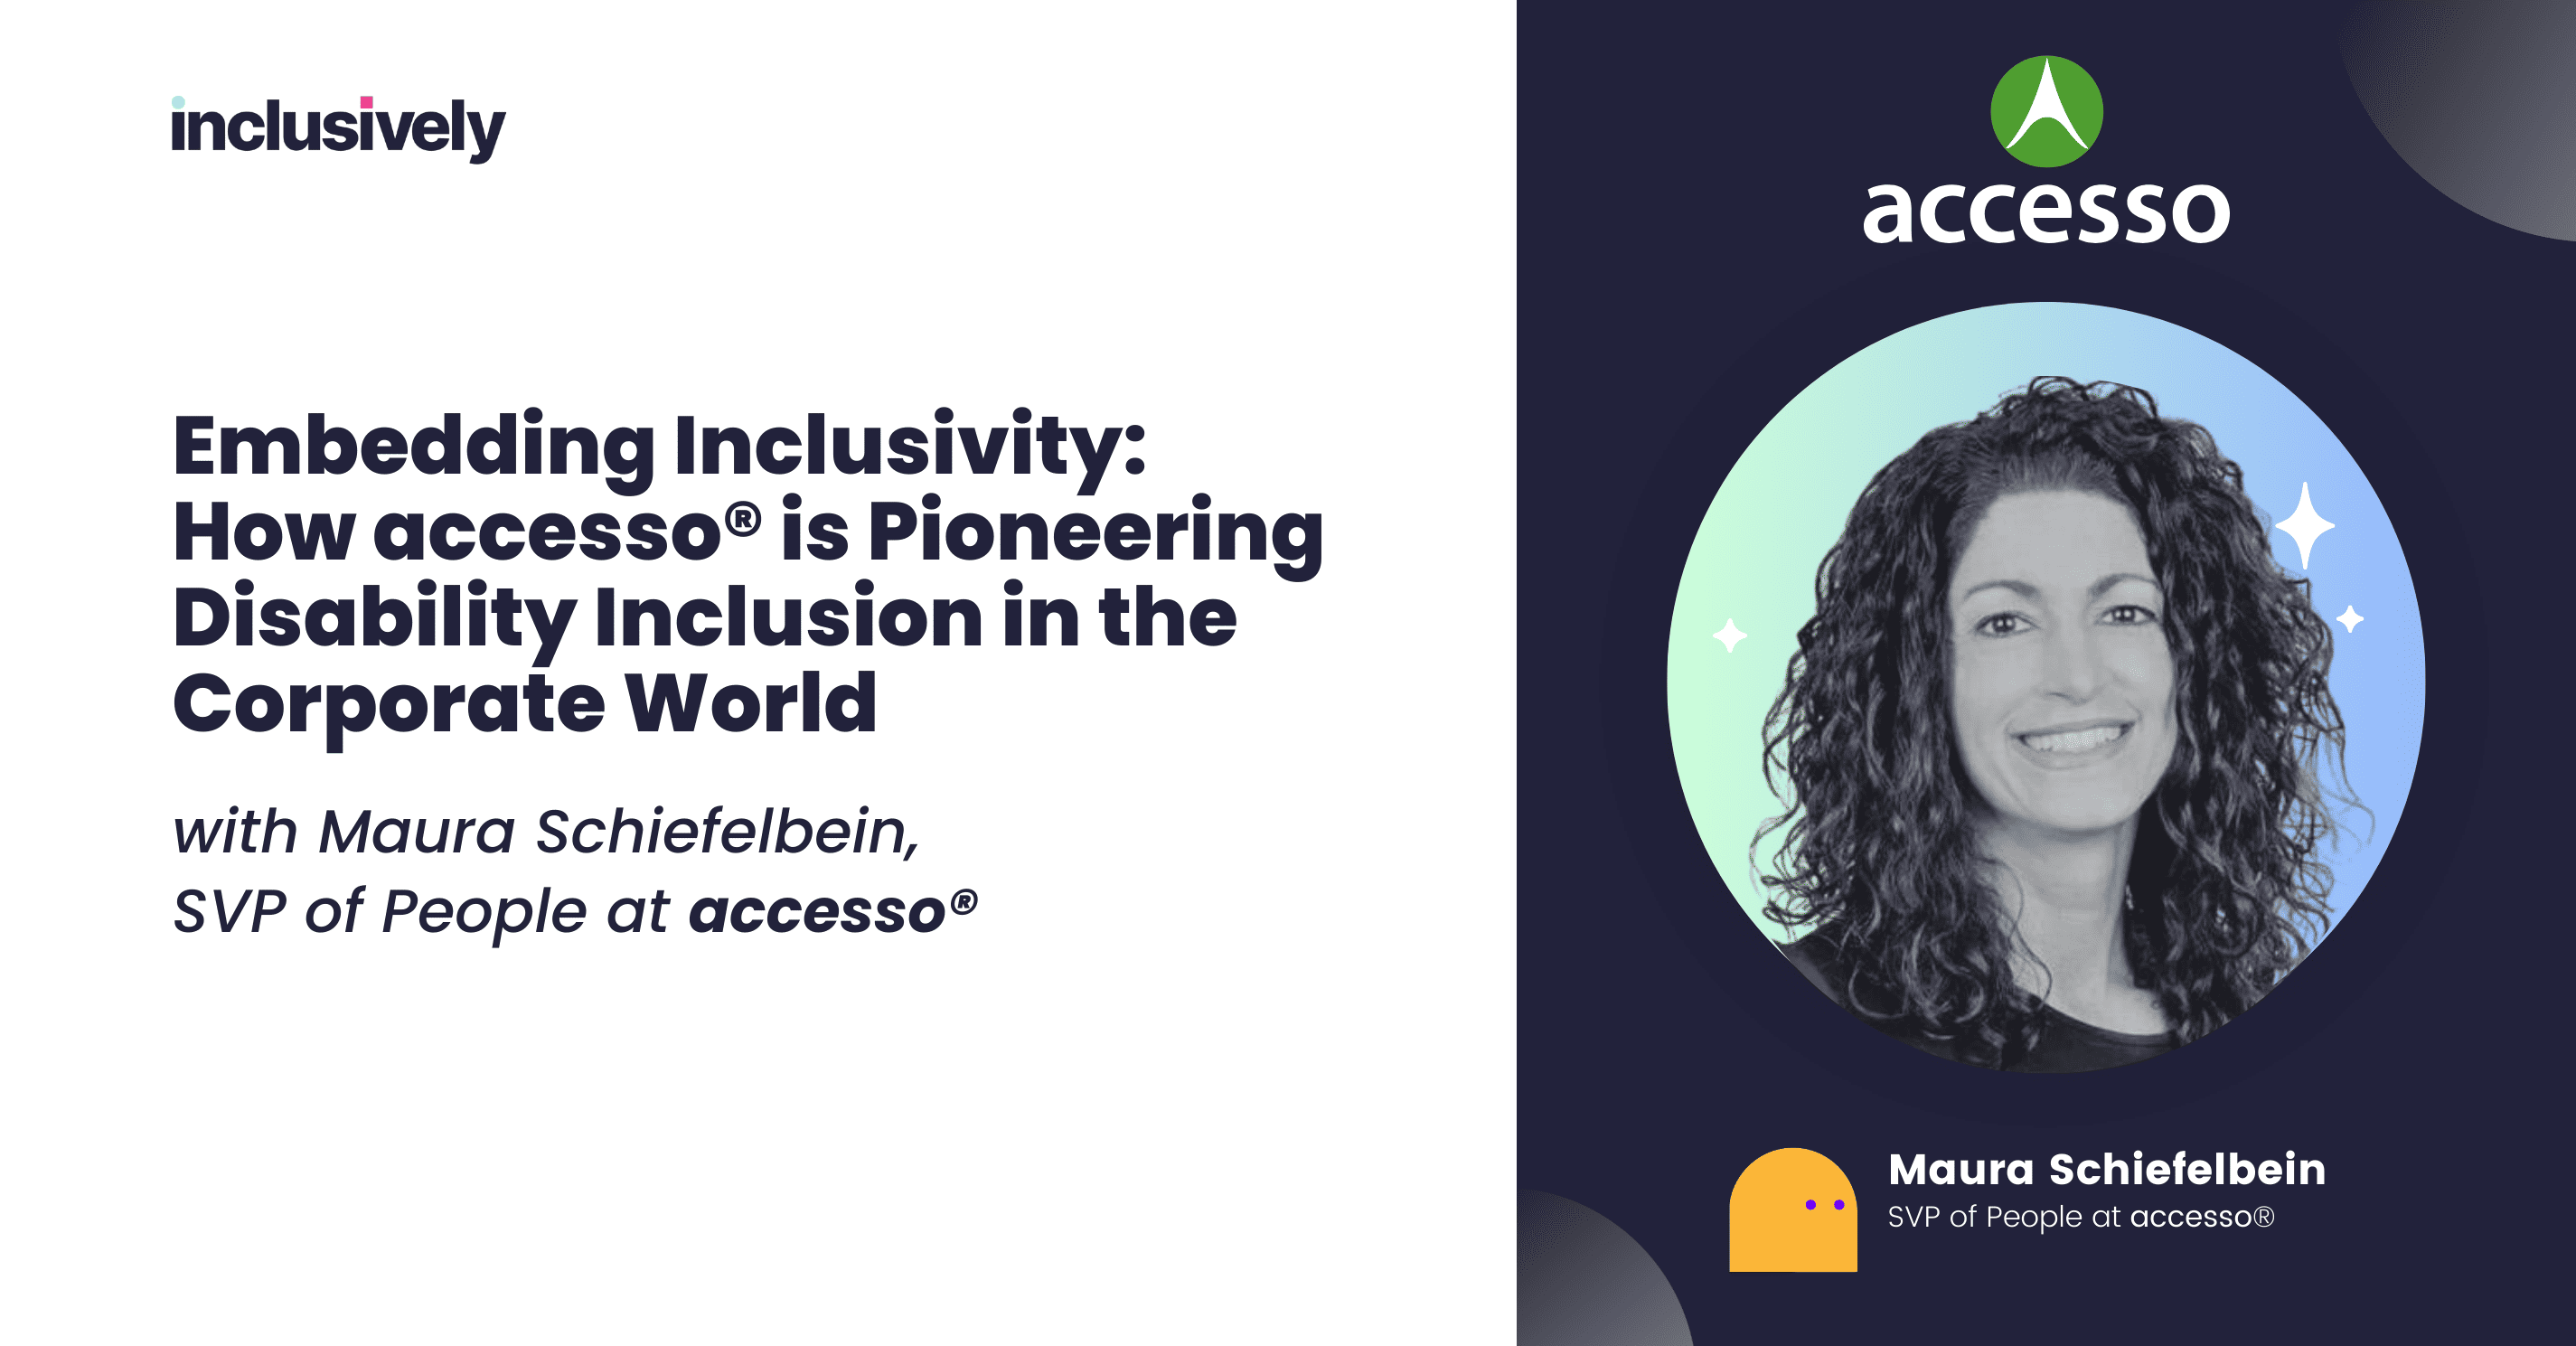 Embedding Inclusivity: How accesso is Pioneering Disability Inclusion in the Corporate World with Maura Schiefelbein, SVP of People at accesso.